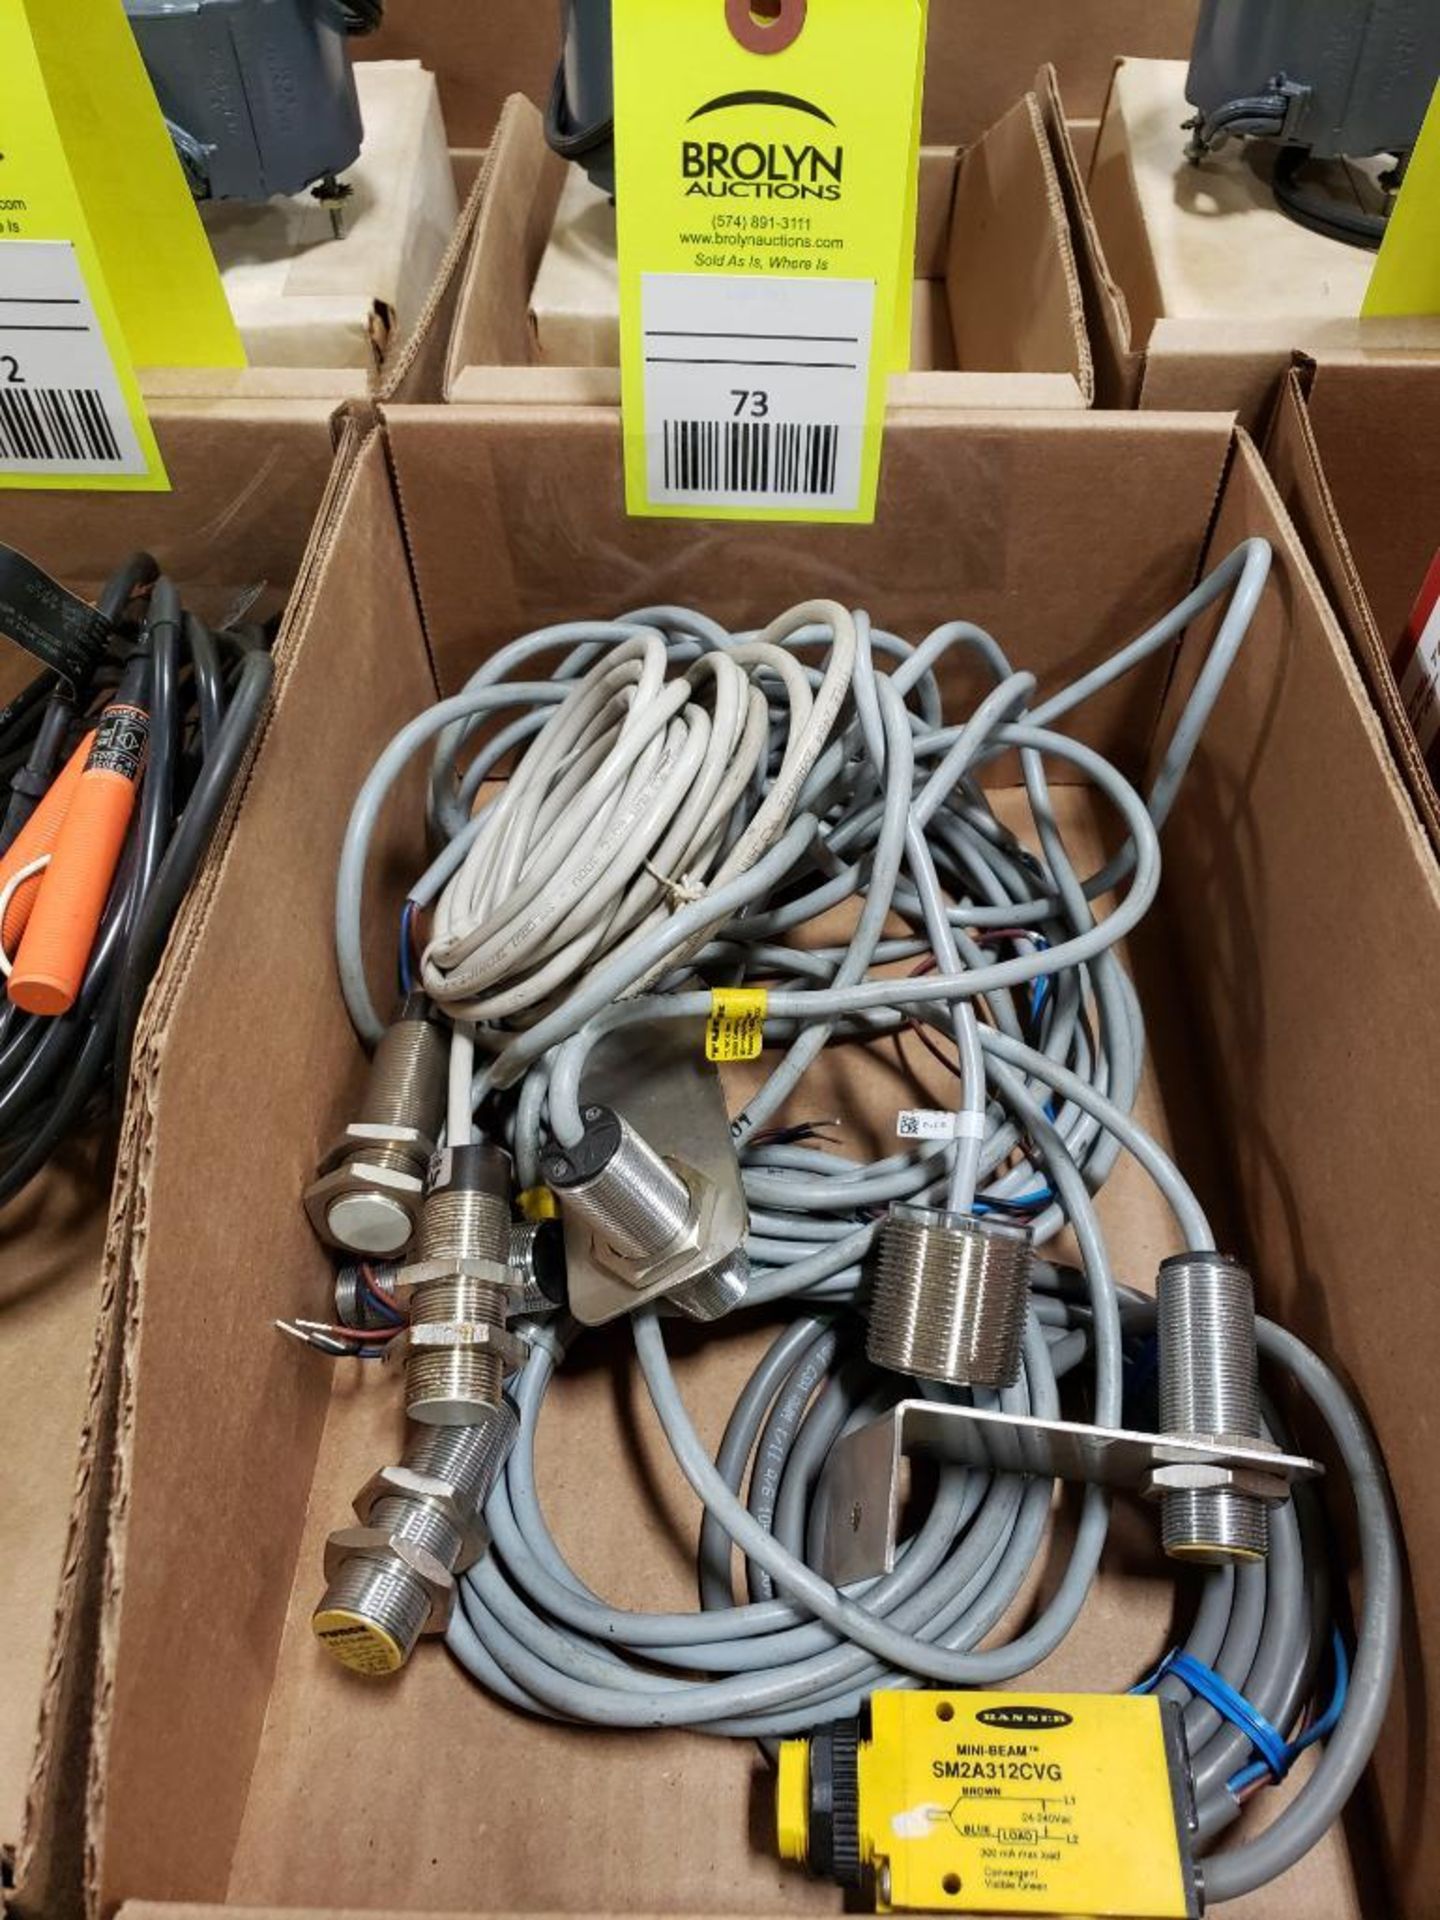 Large Qty of assorted Banner and Turck proximity sensors. Most appear new.